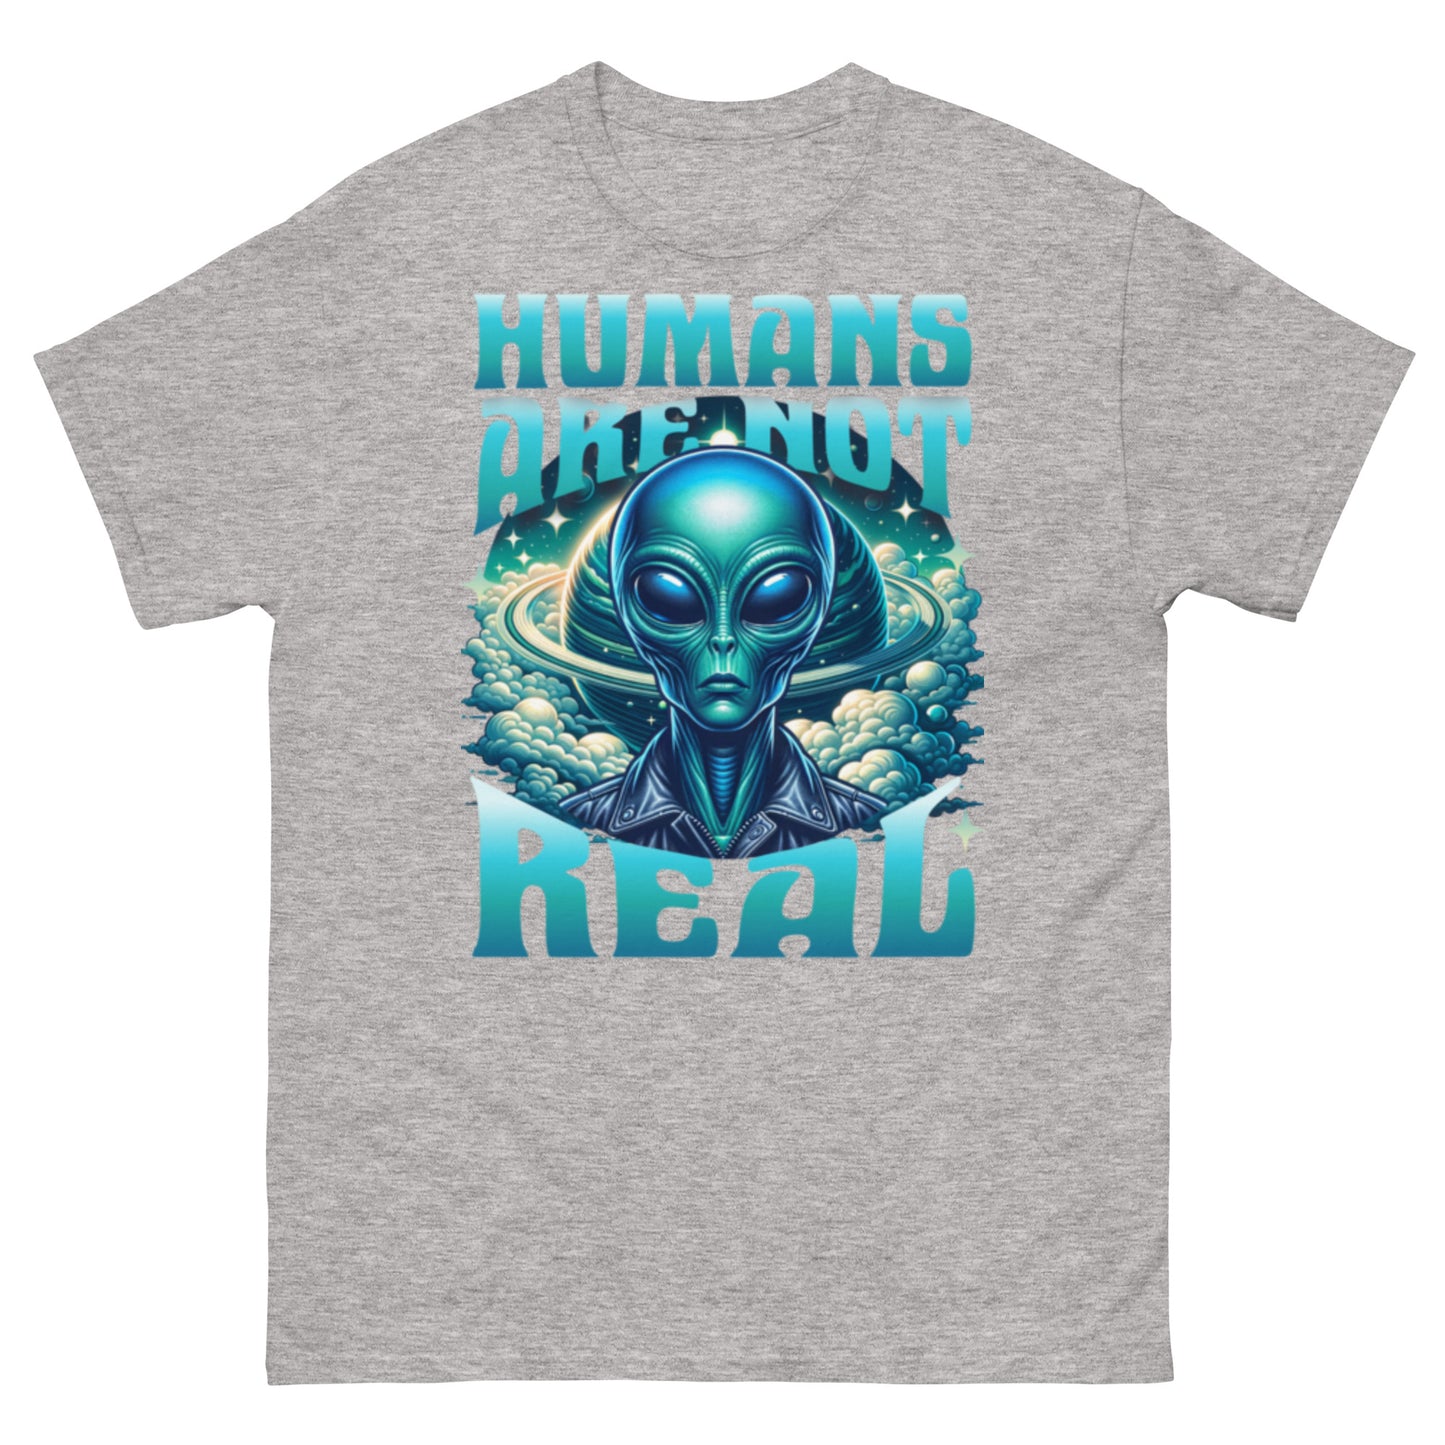 humans are not real Unisex classic tee